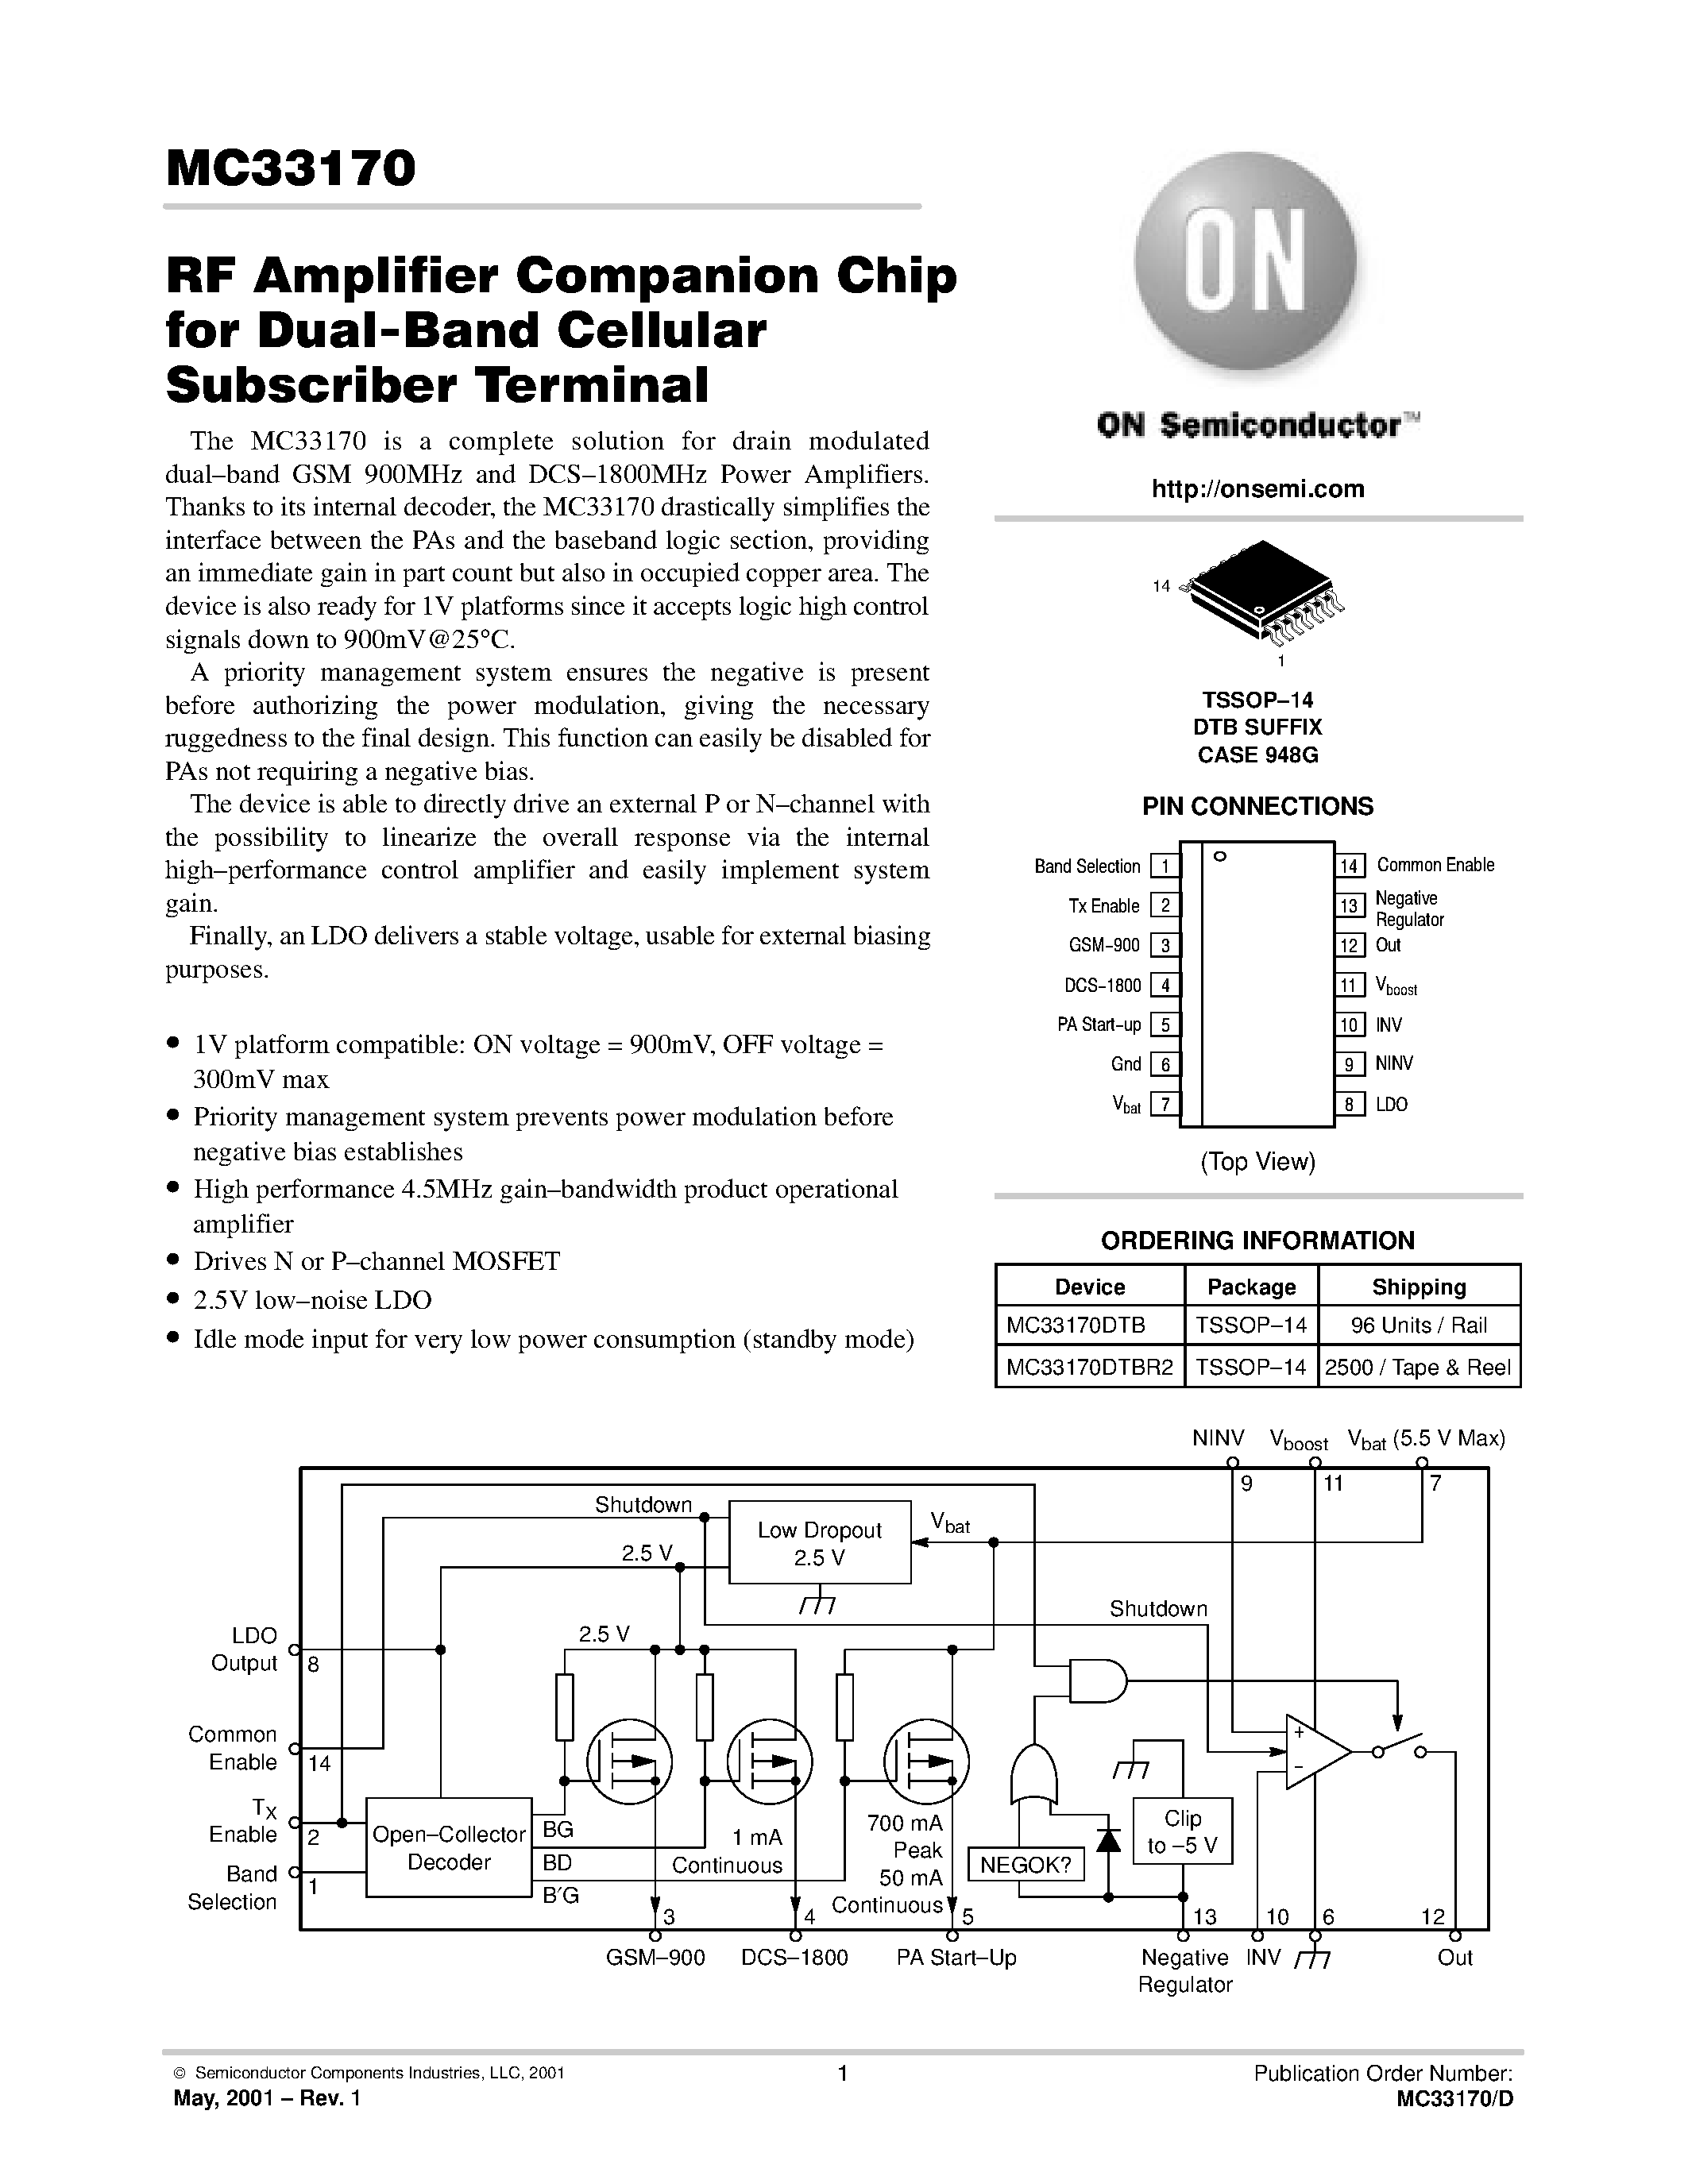 Datasheet MC33170 - RF Amplifier Companion Chip for Dual-Band Cellular Subscriber Terminal page 1